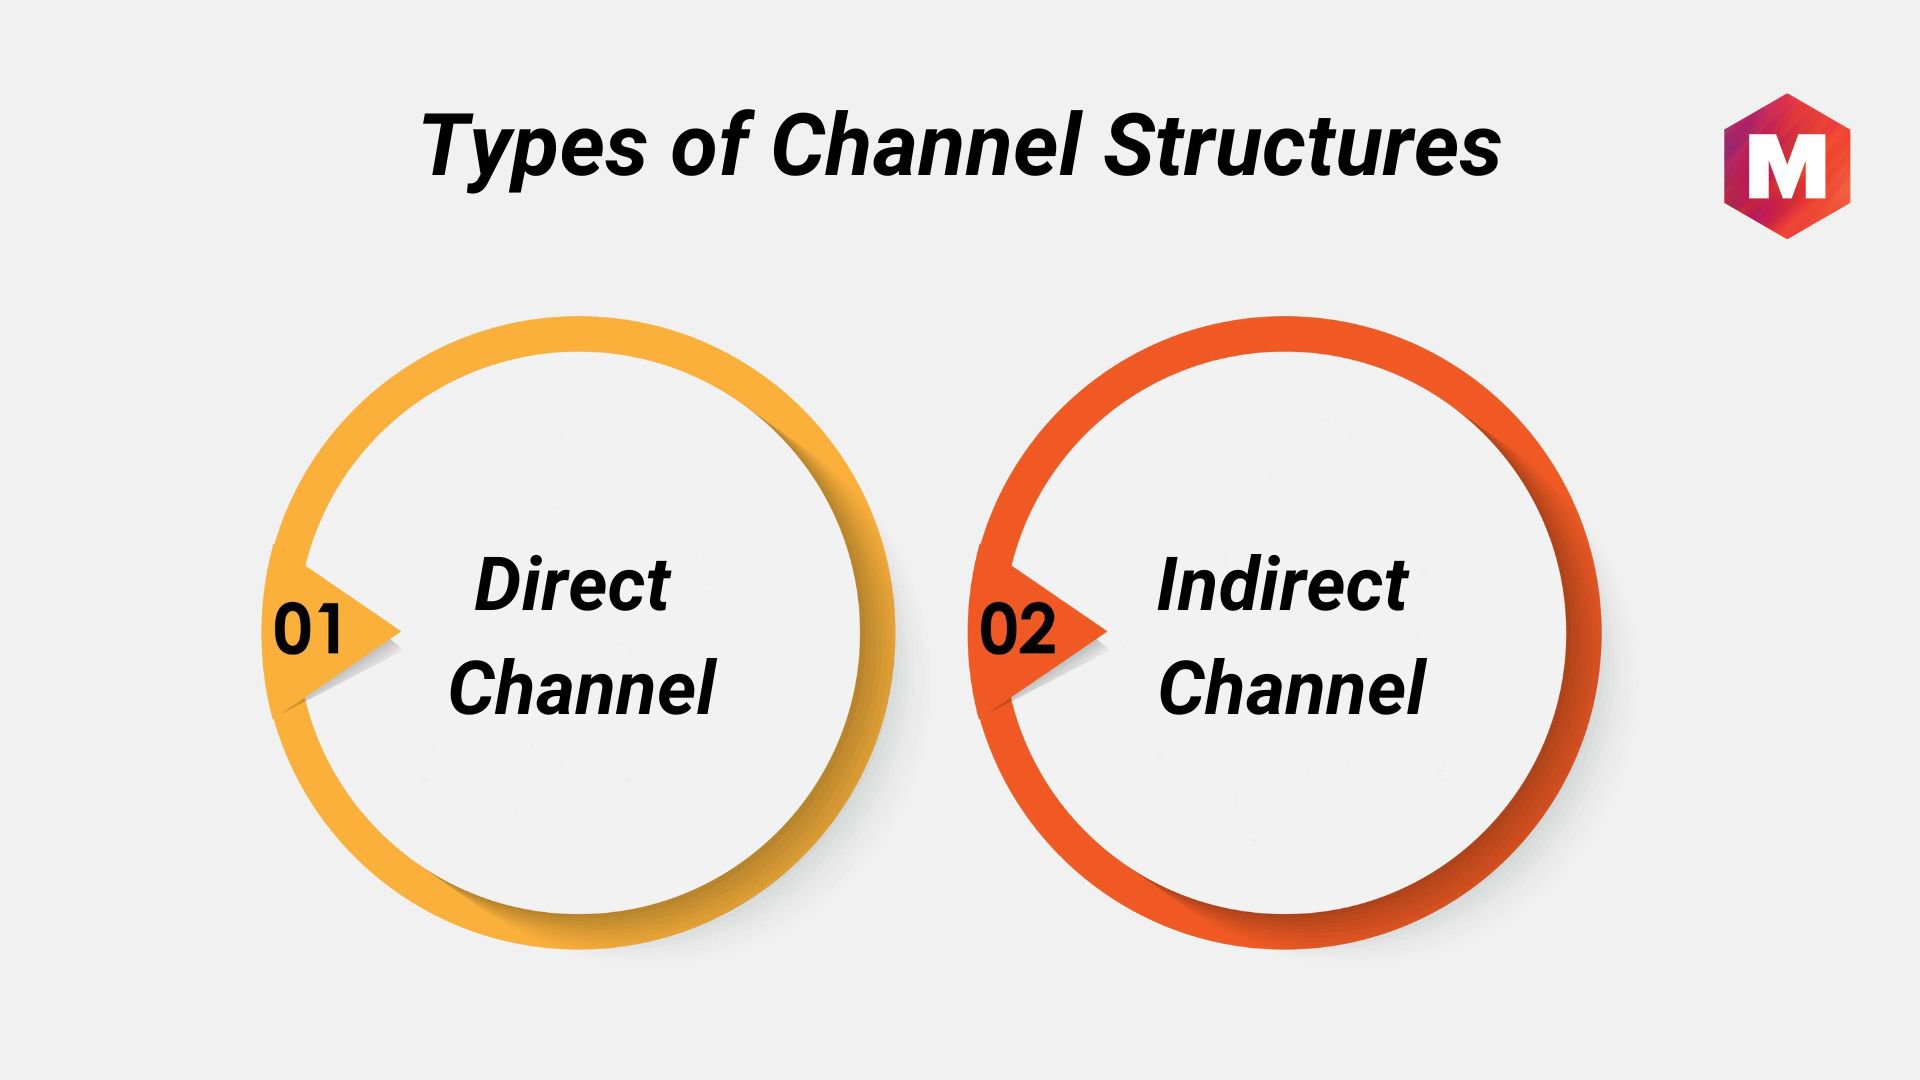 Types of Channel Structures